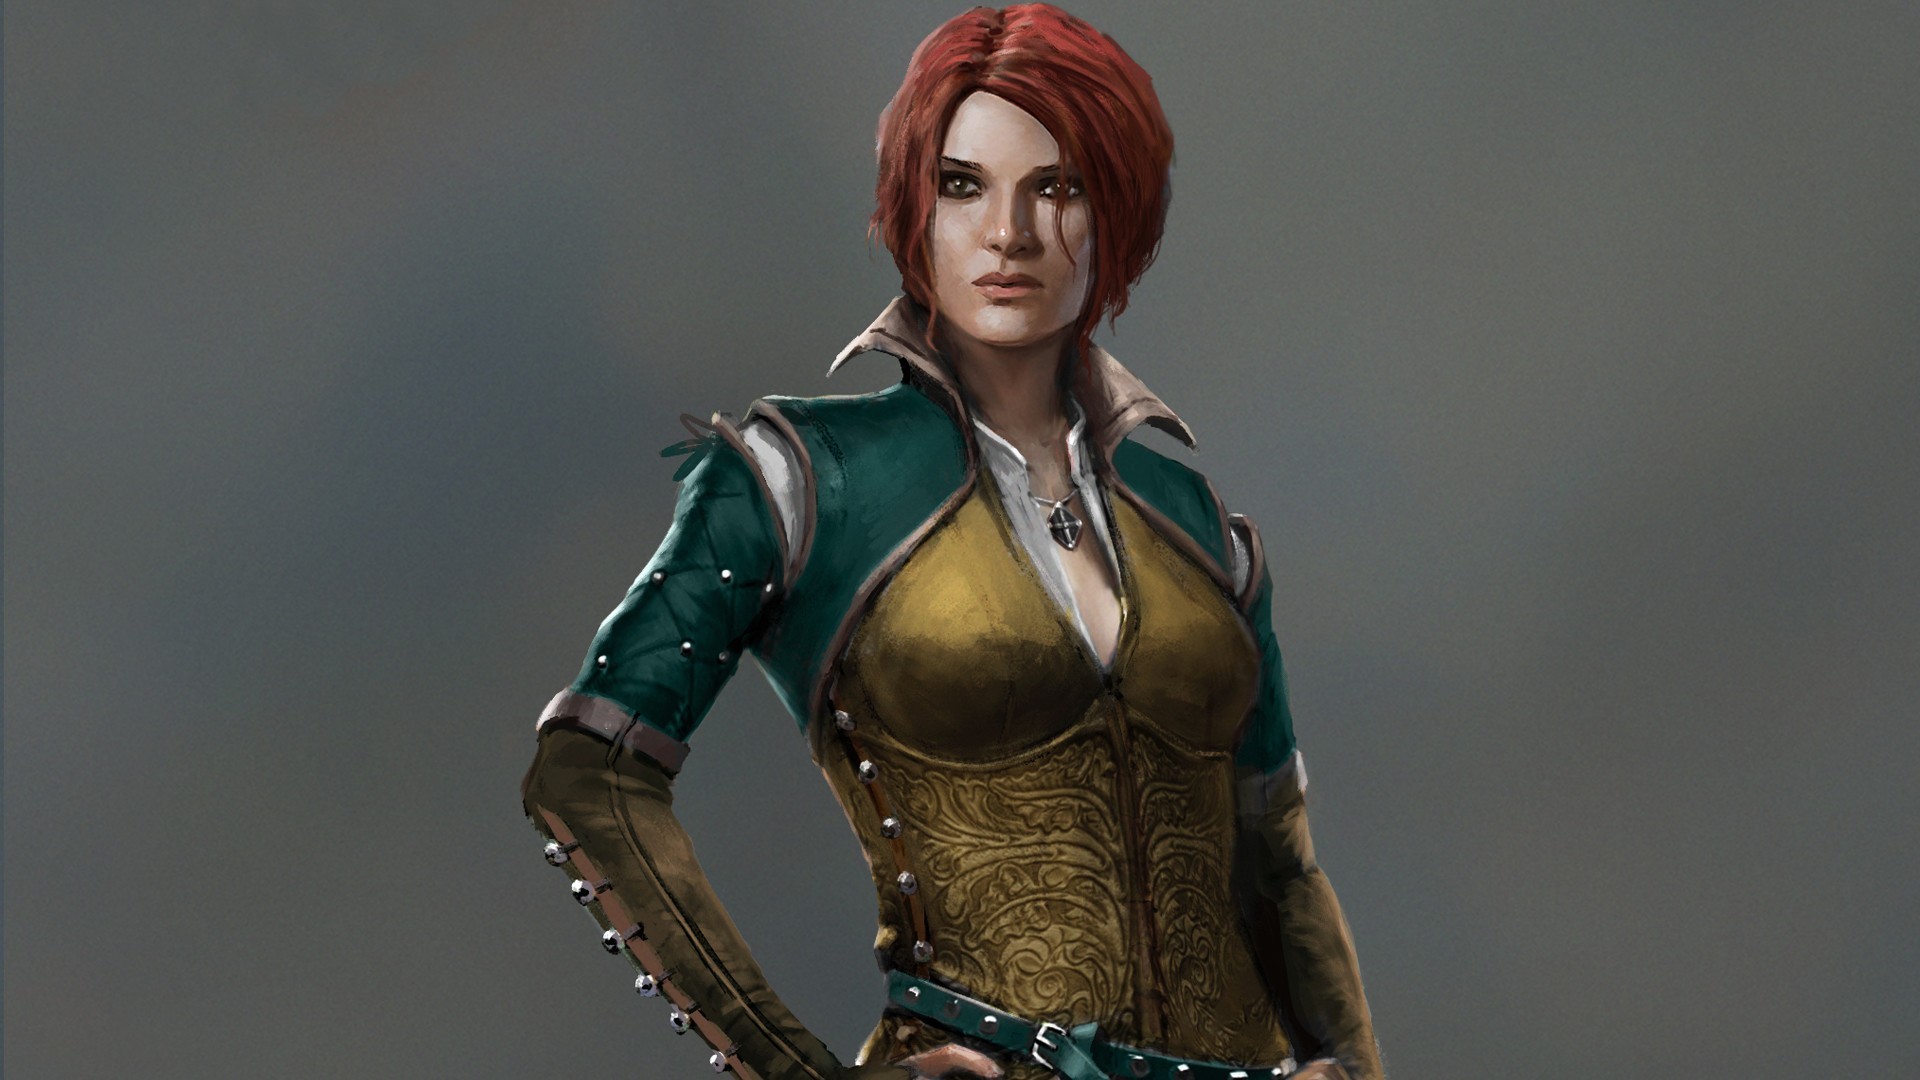 General 1920x1080 Triss Merigold The Witcher 3: Wild Hunt video games The Witcher sorceress PC gaming fantasy art fantasy girl video game girls simple background redhead women necklace